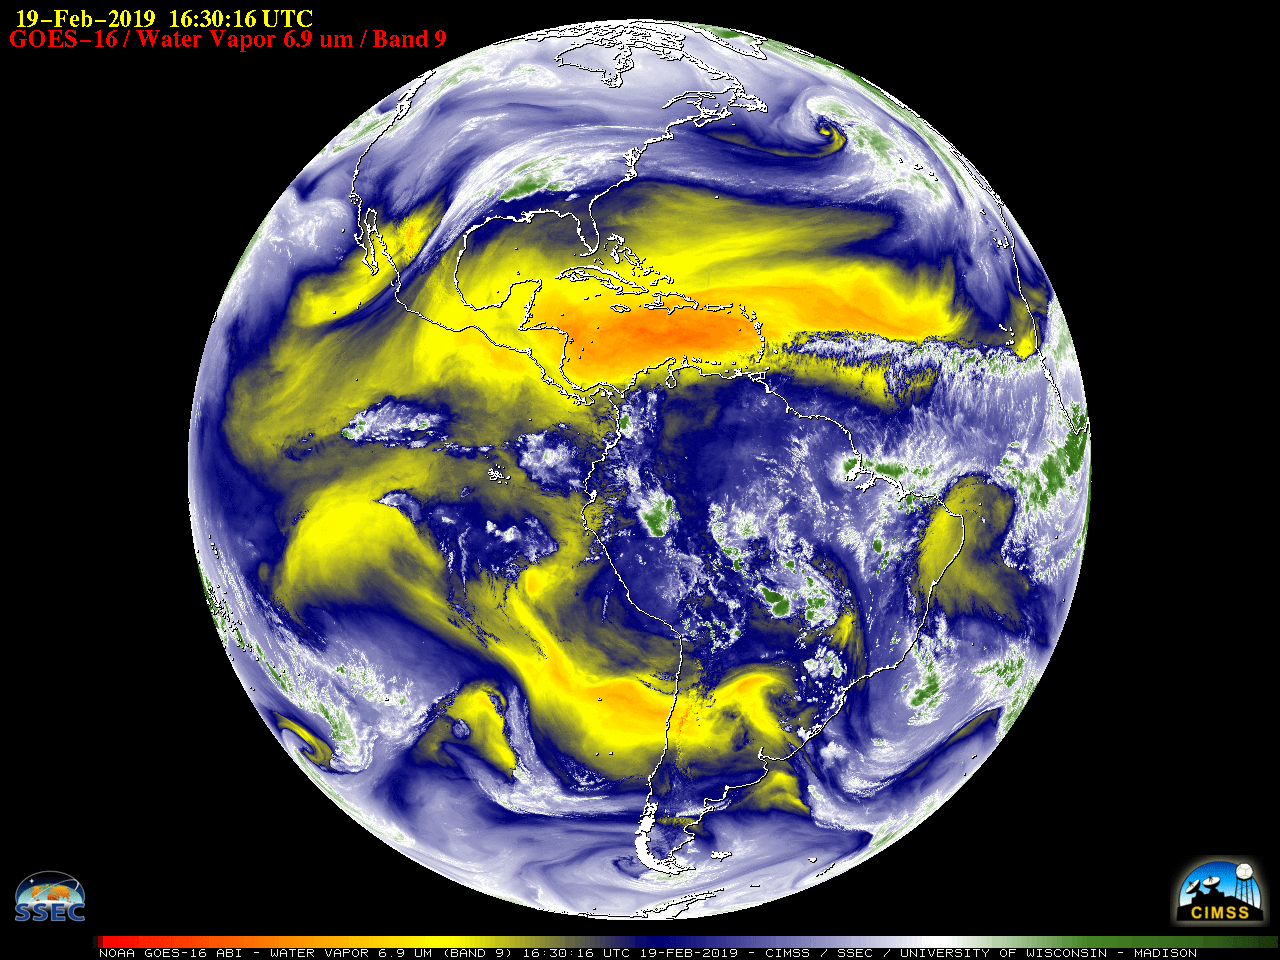 GOES-16 Mid-level Water Vapor (6.9 µm) images [click to play animation]